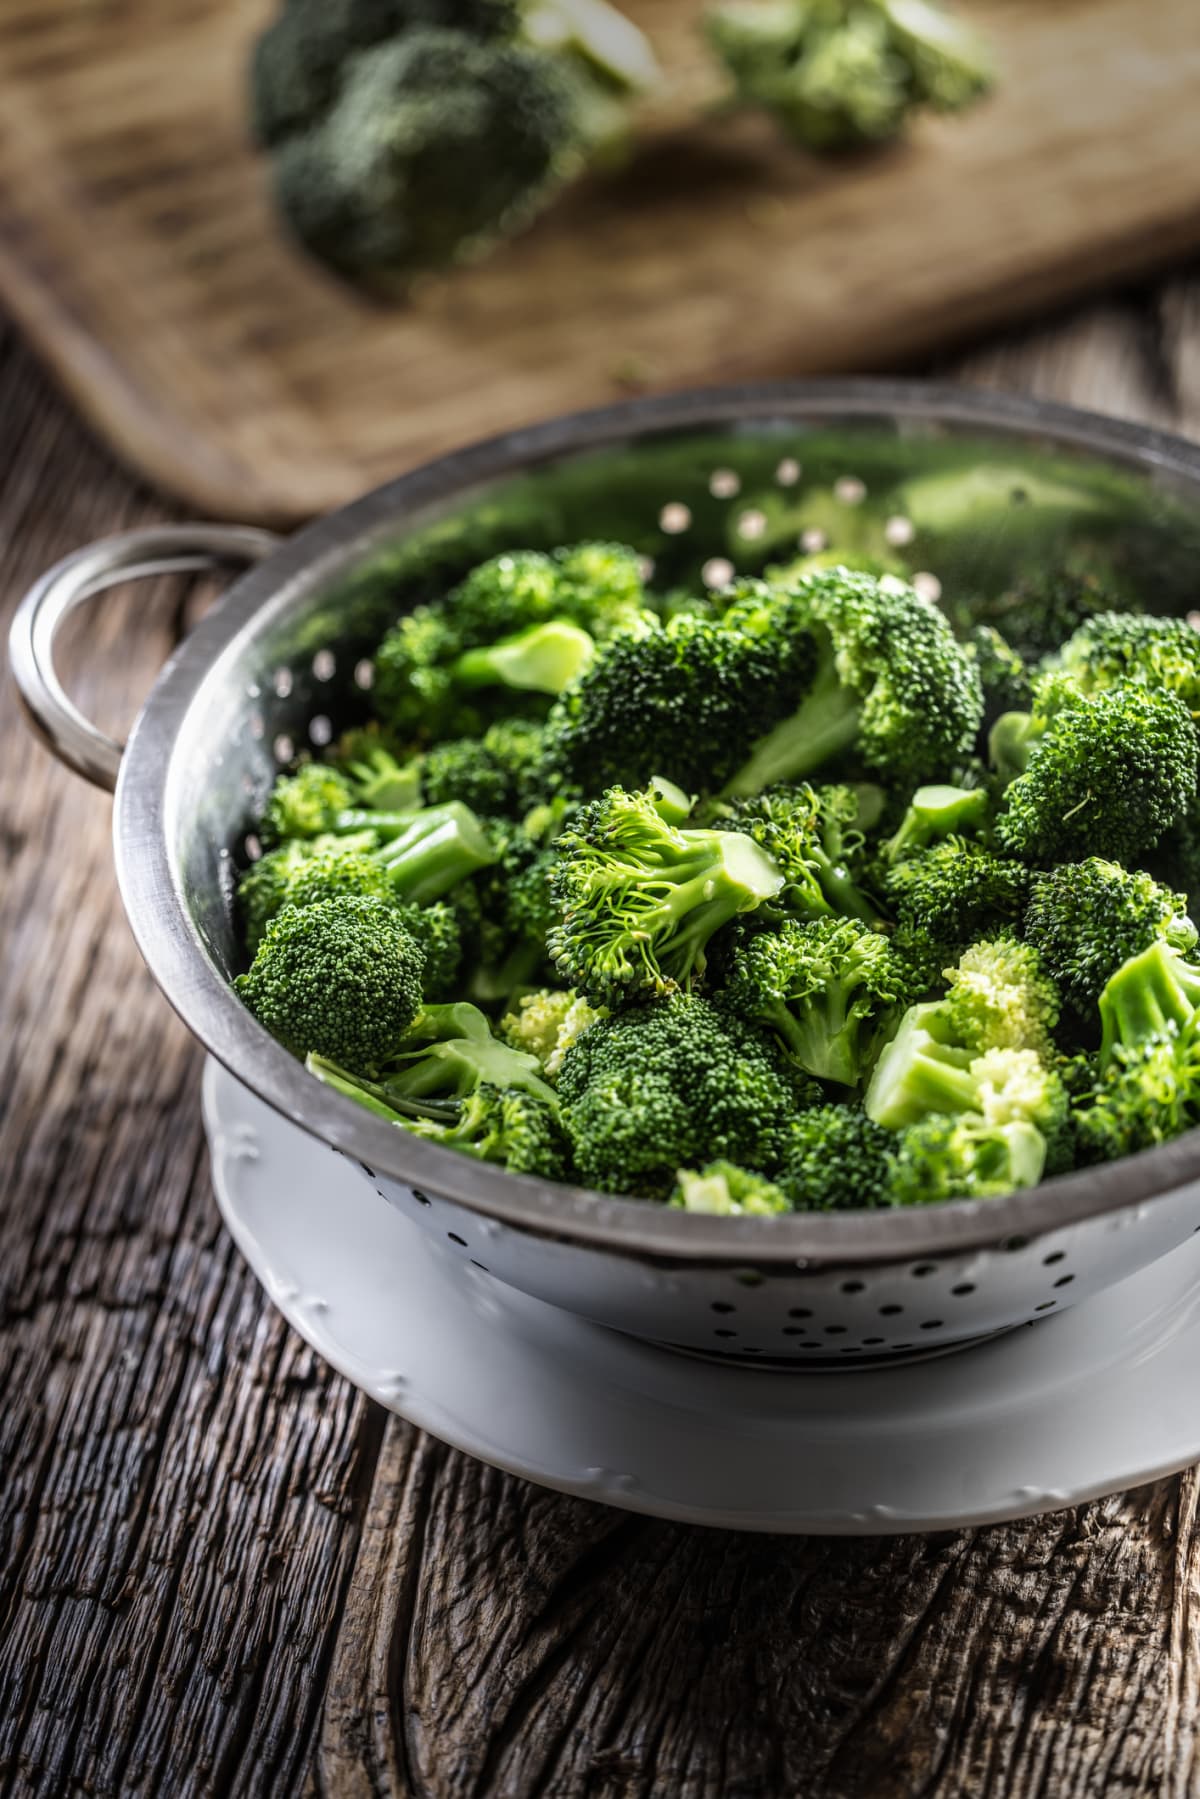 Steamed broccoli in a stainless steel steamer